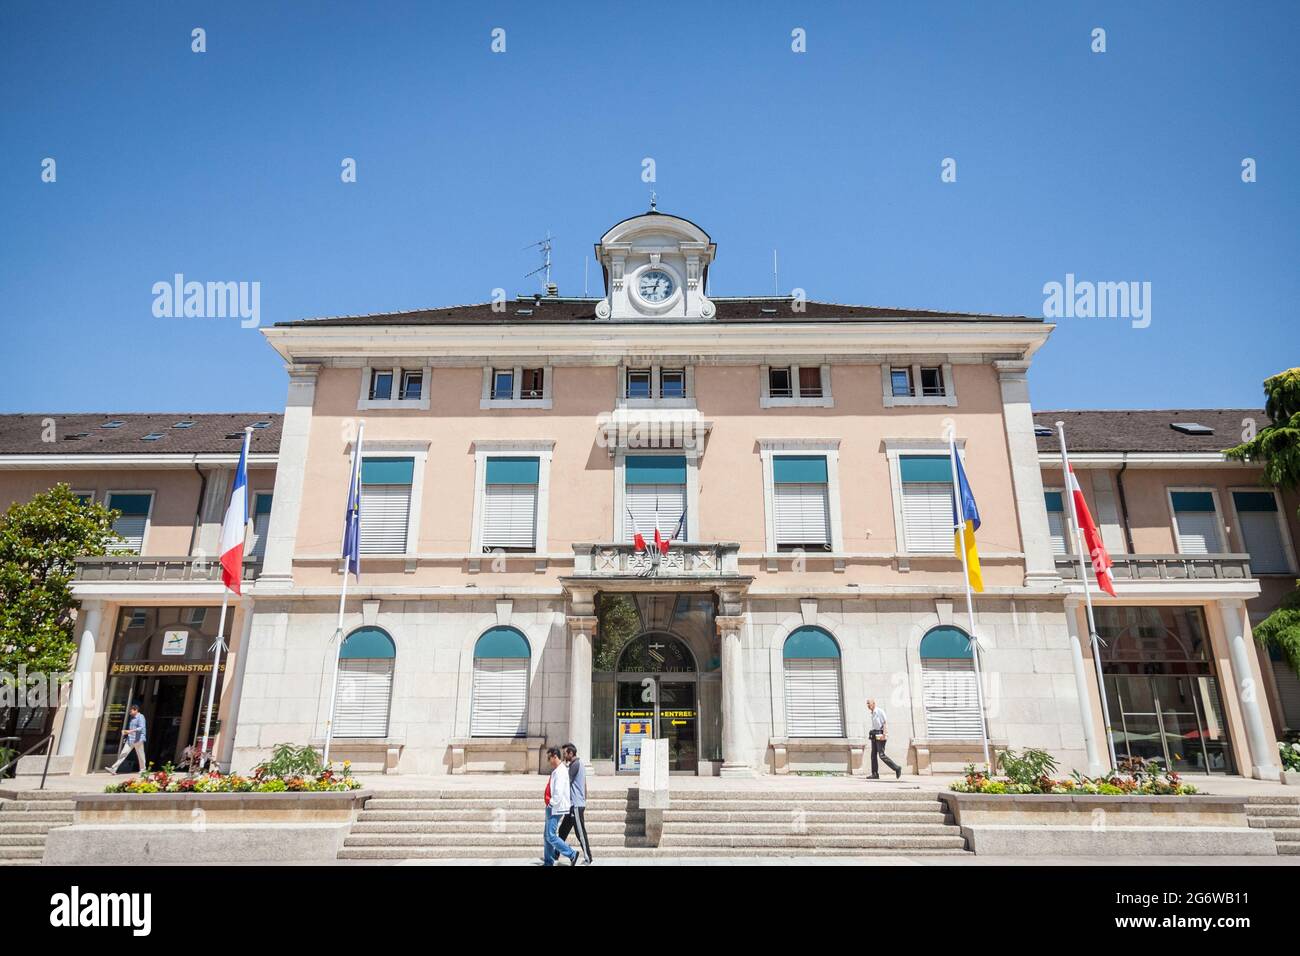 Picture of the Mairie D'annemasse city hall in Annemasse, France. Annemasse is a commune in the Haute-Savoie department in the Auvergne-Rhône-Alpes re Stock Photo